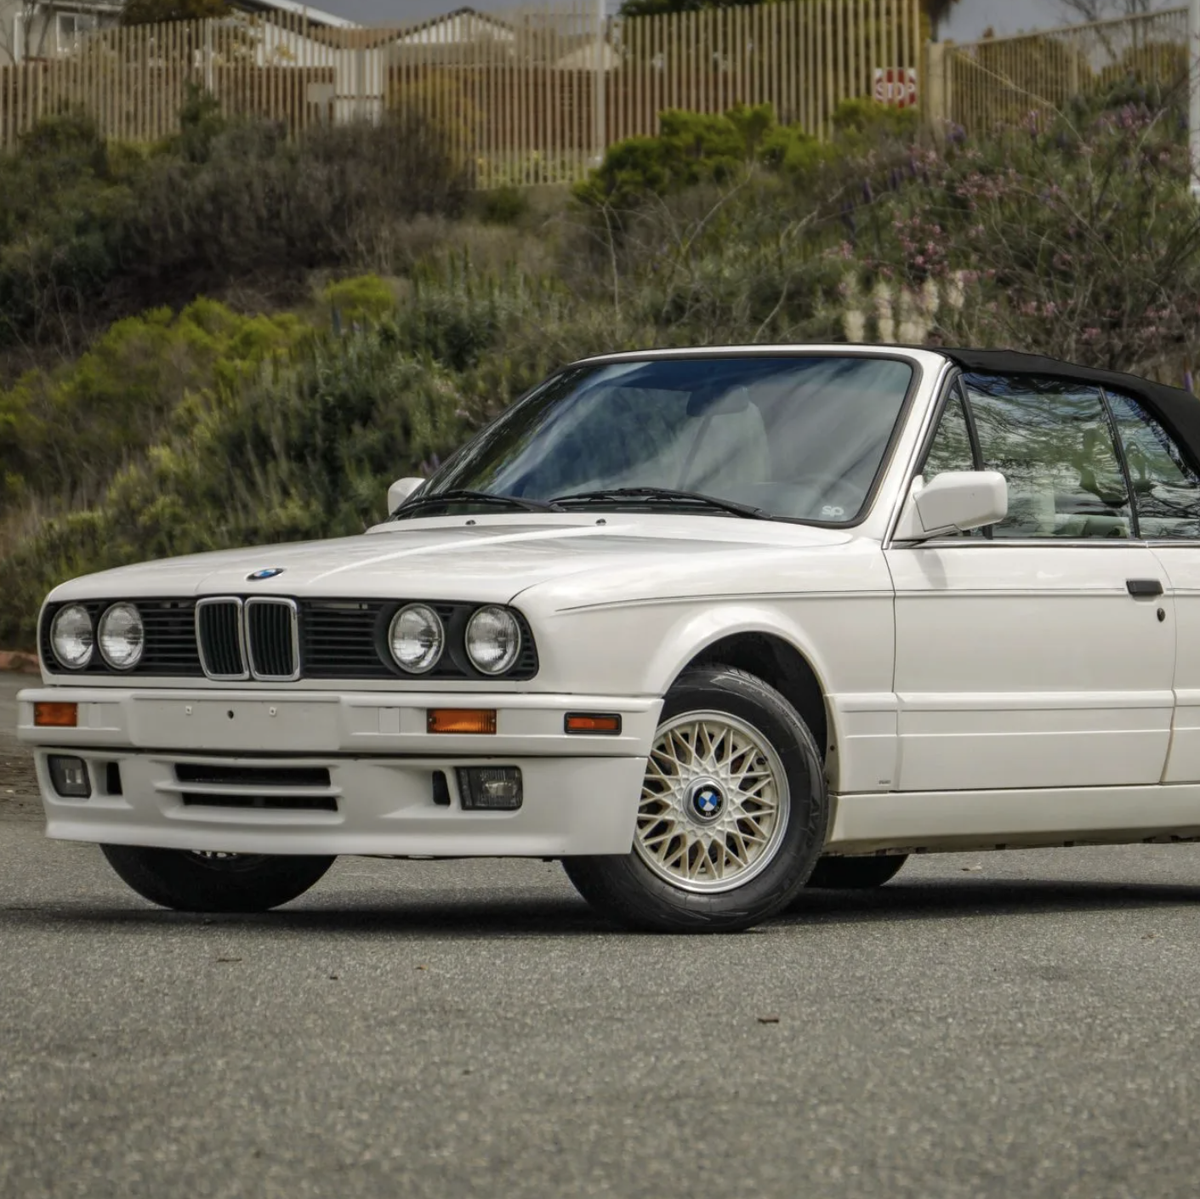 BMW 325i Convertible a Rare Package Is BaT Pick